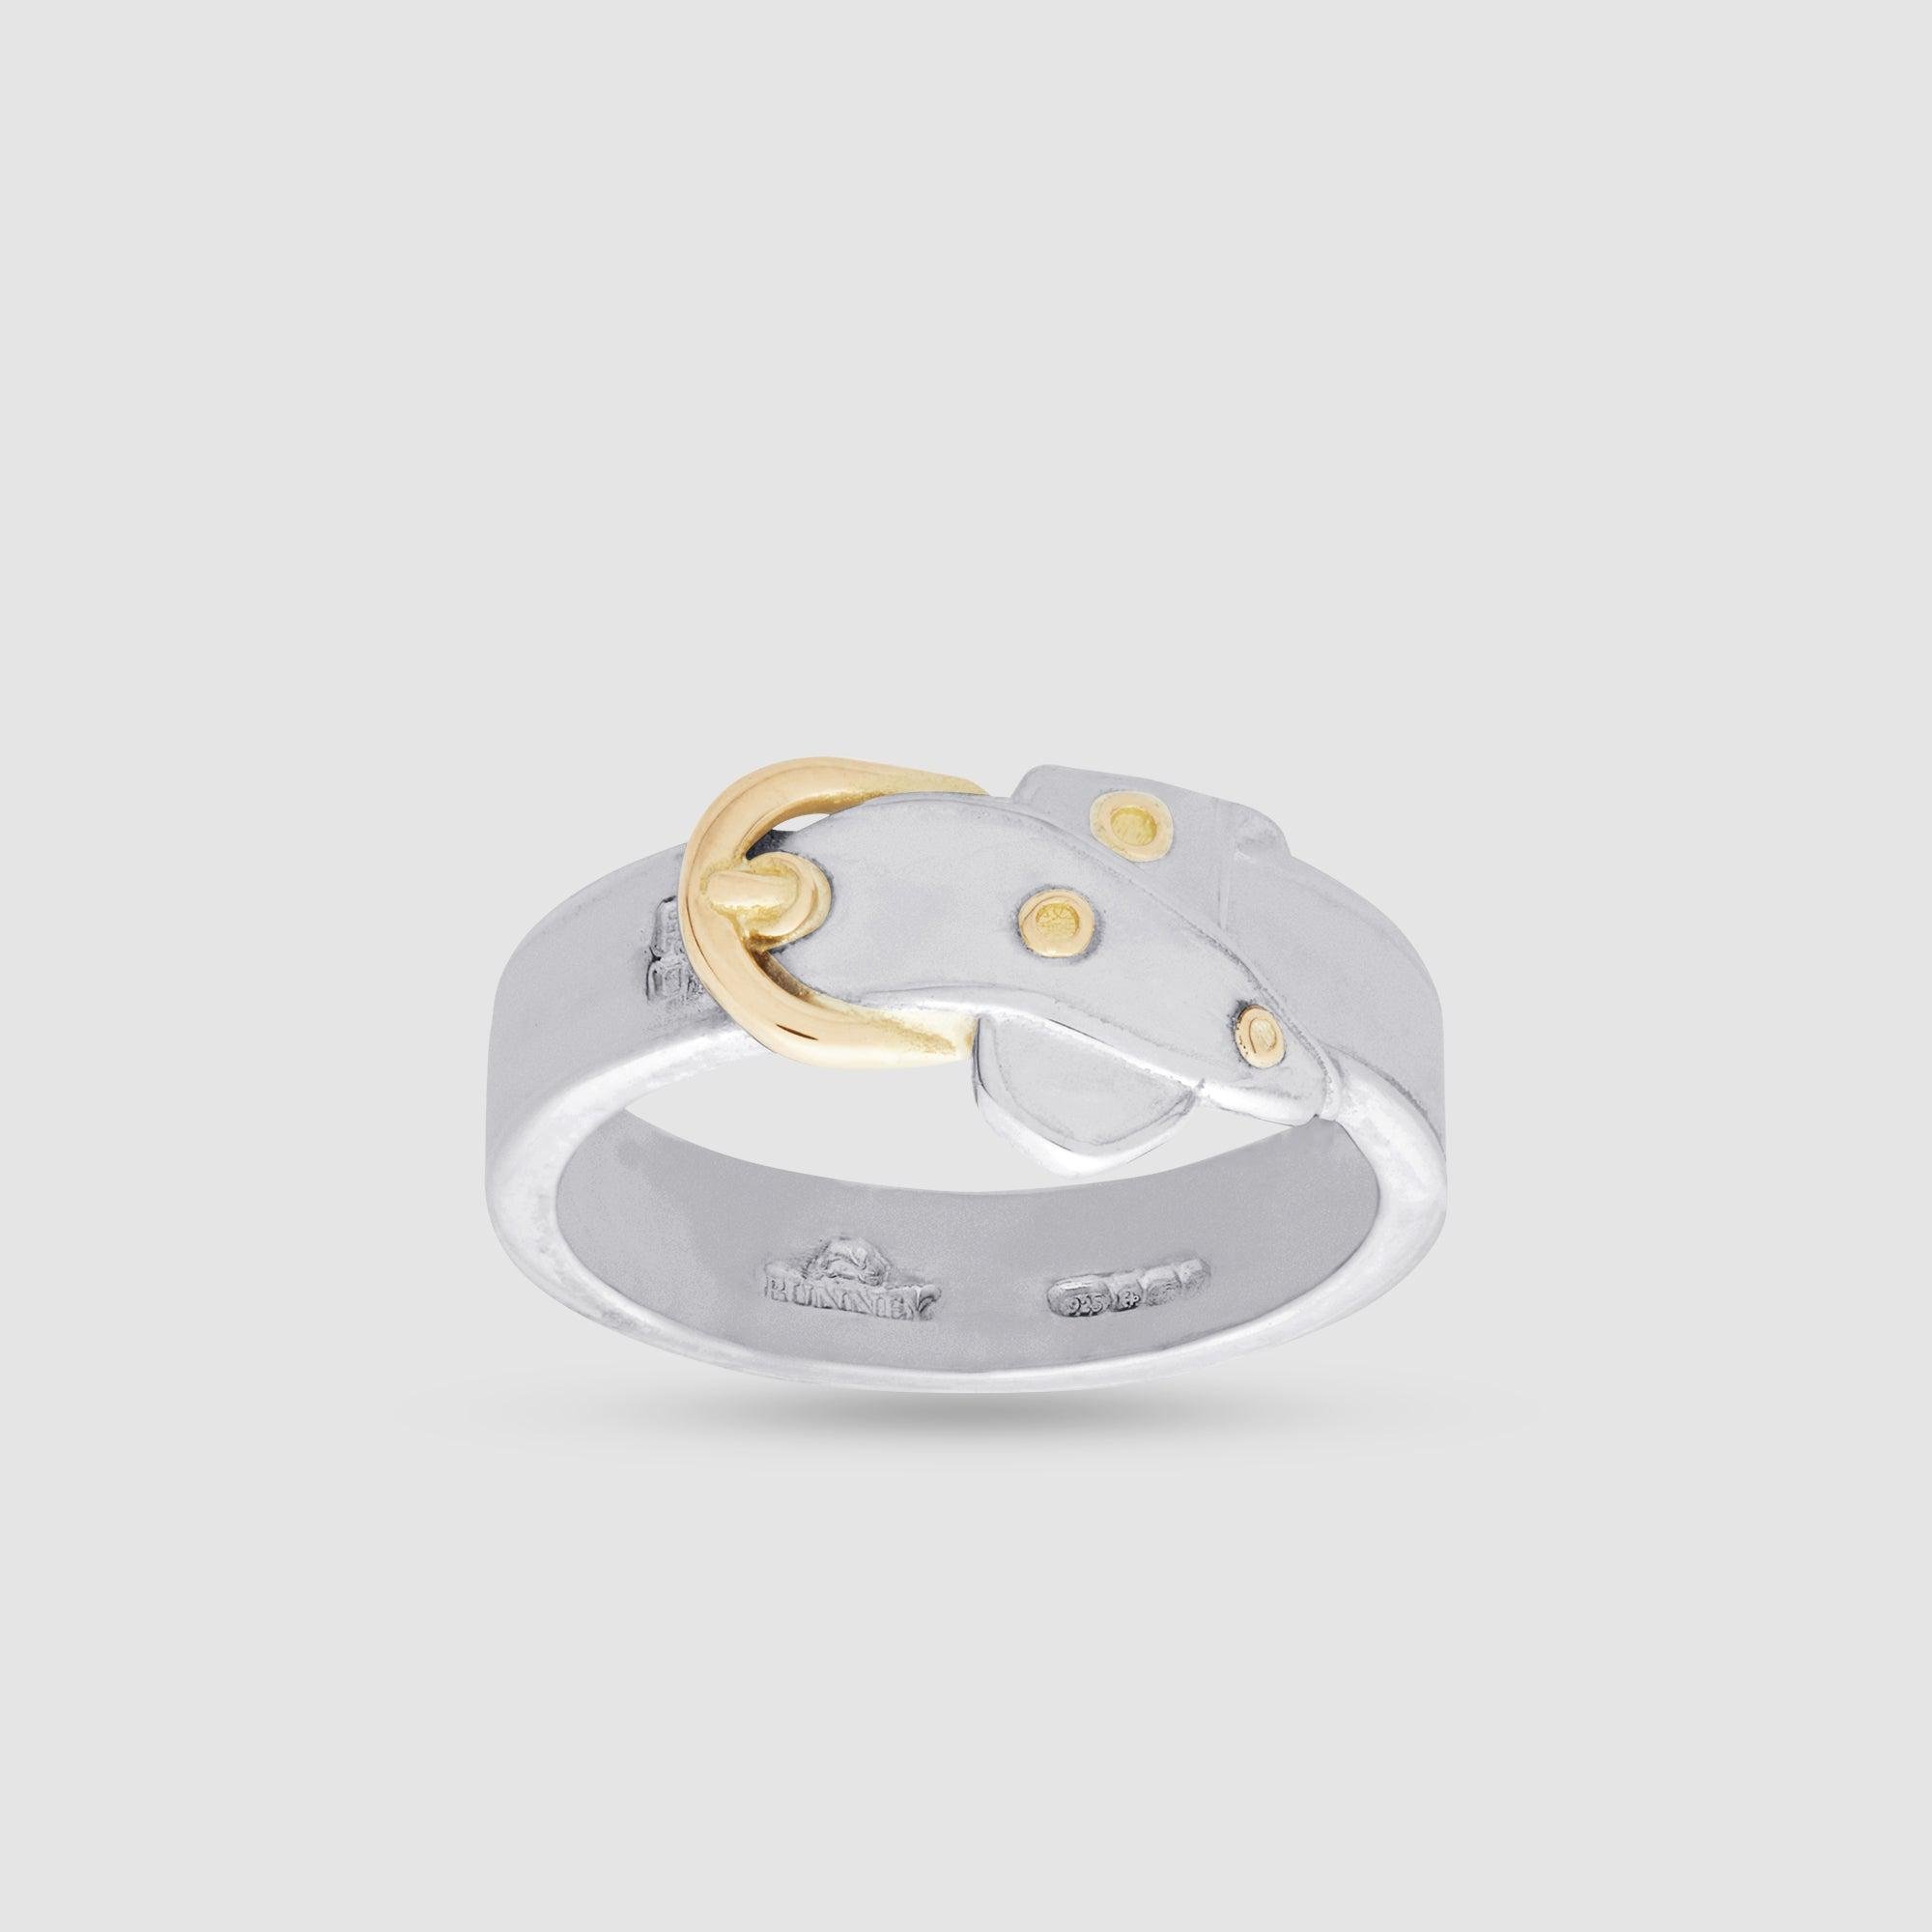 Bunney - Silver and Yellow Gold Precious Wares Belt Ring by BUNNEY